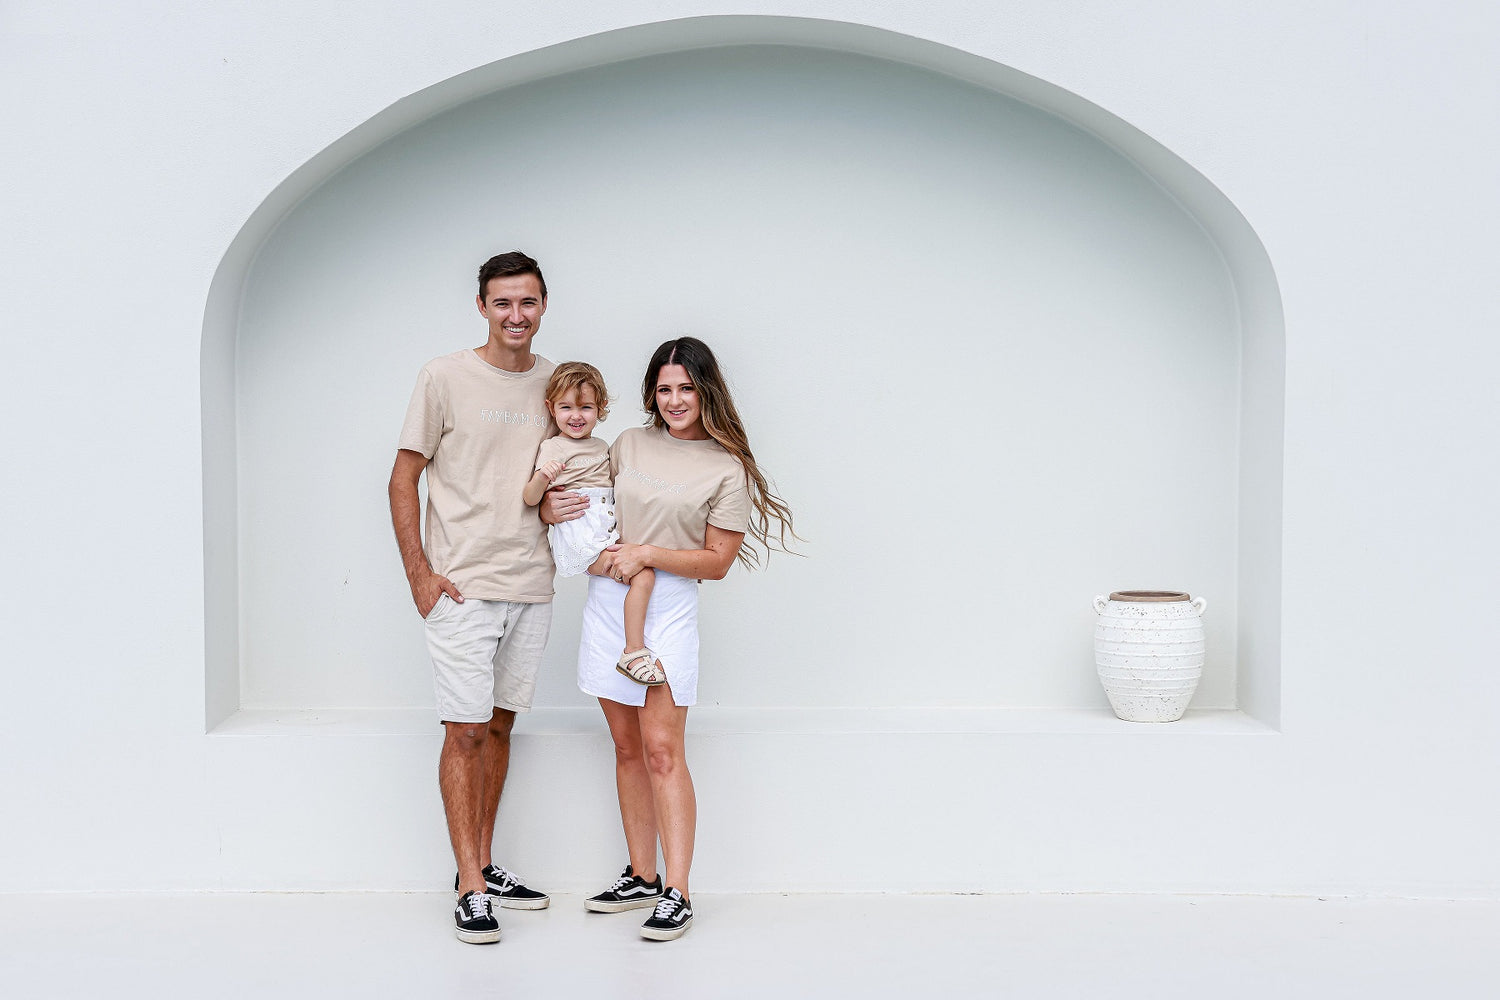 mum, dad and daughter posing for photo in front of arched wall